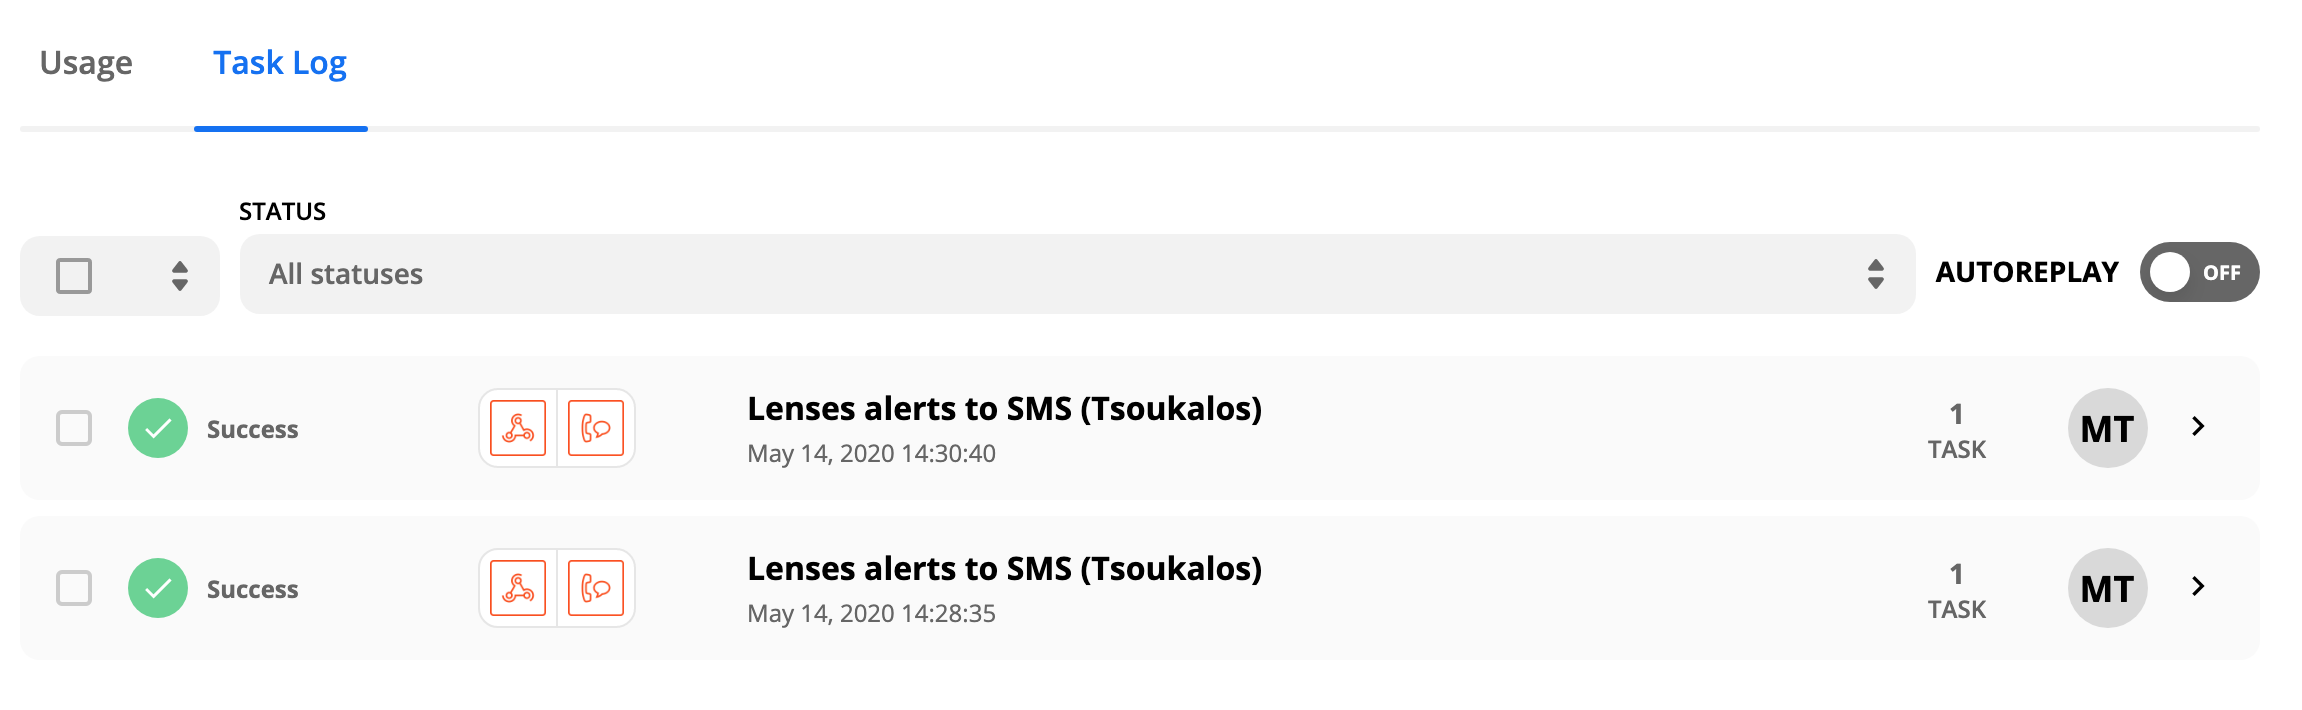 SMS Task History 